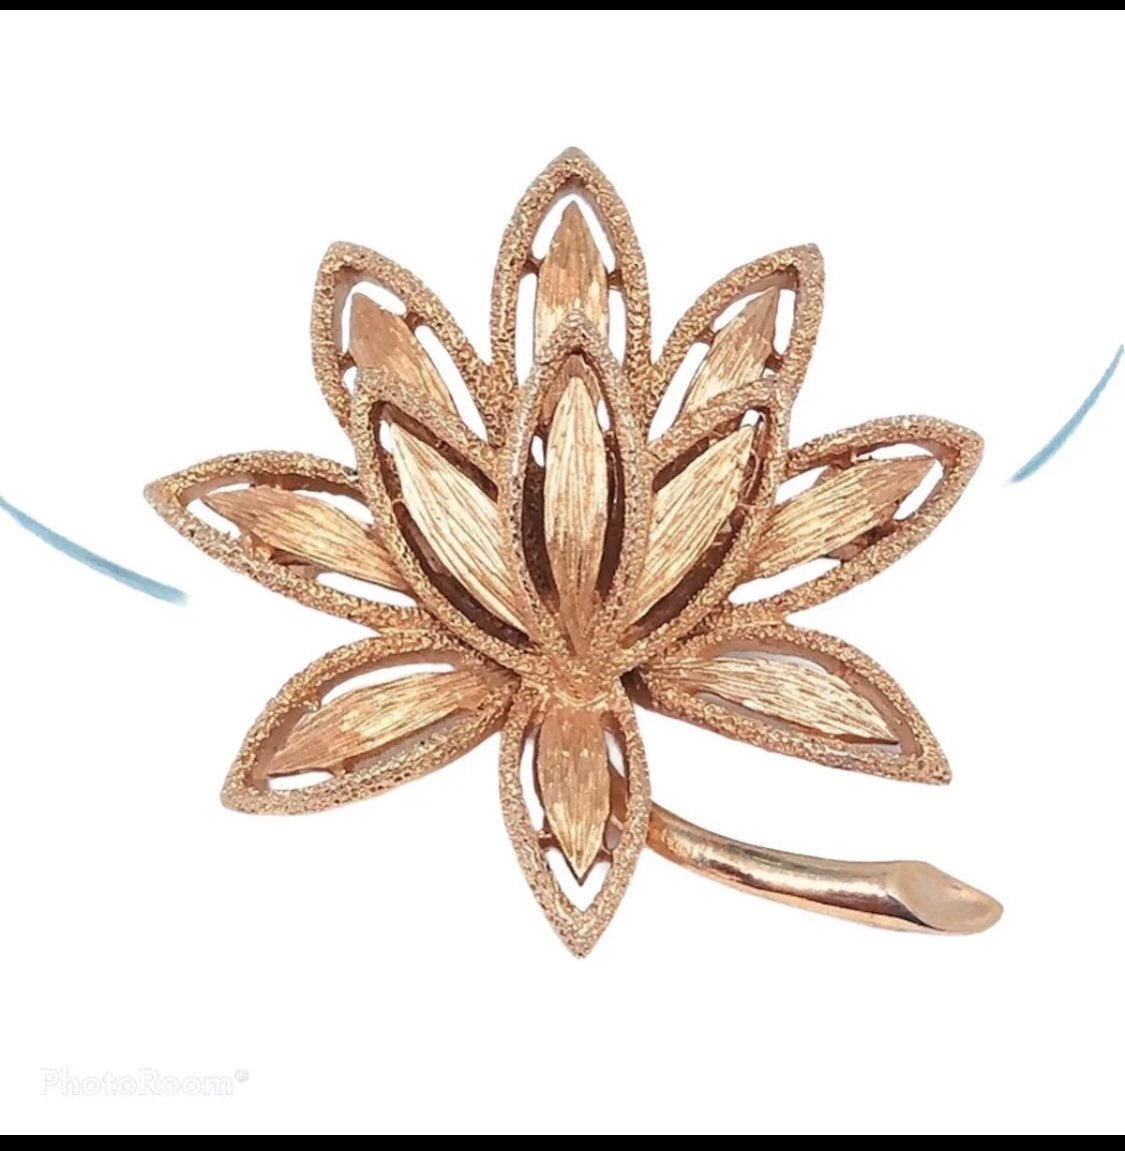 Vintage Avon Lotus gold Brooch - collectible jewelry